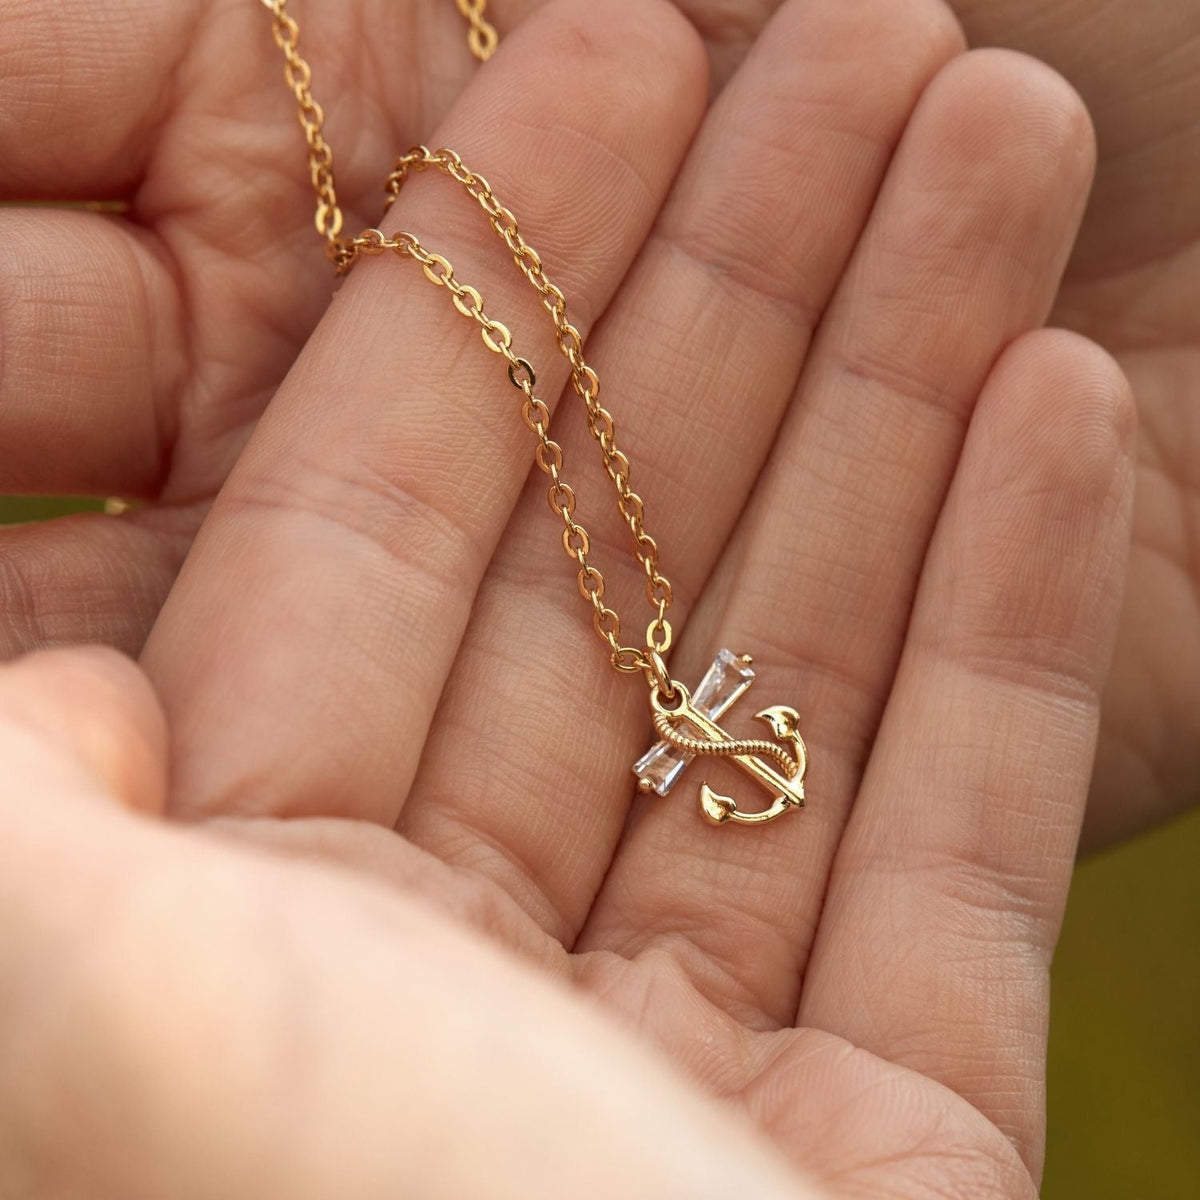 To The Mother of the Bride (From Groom) | Piece of Your Heart | Anchor Necklace